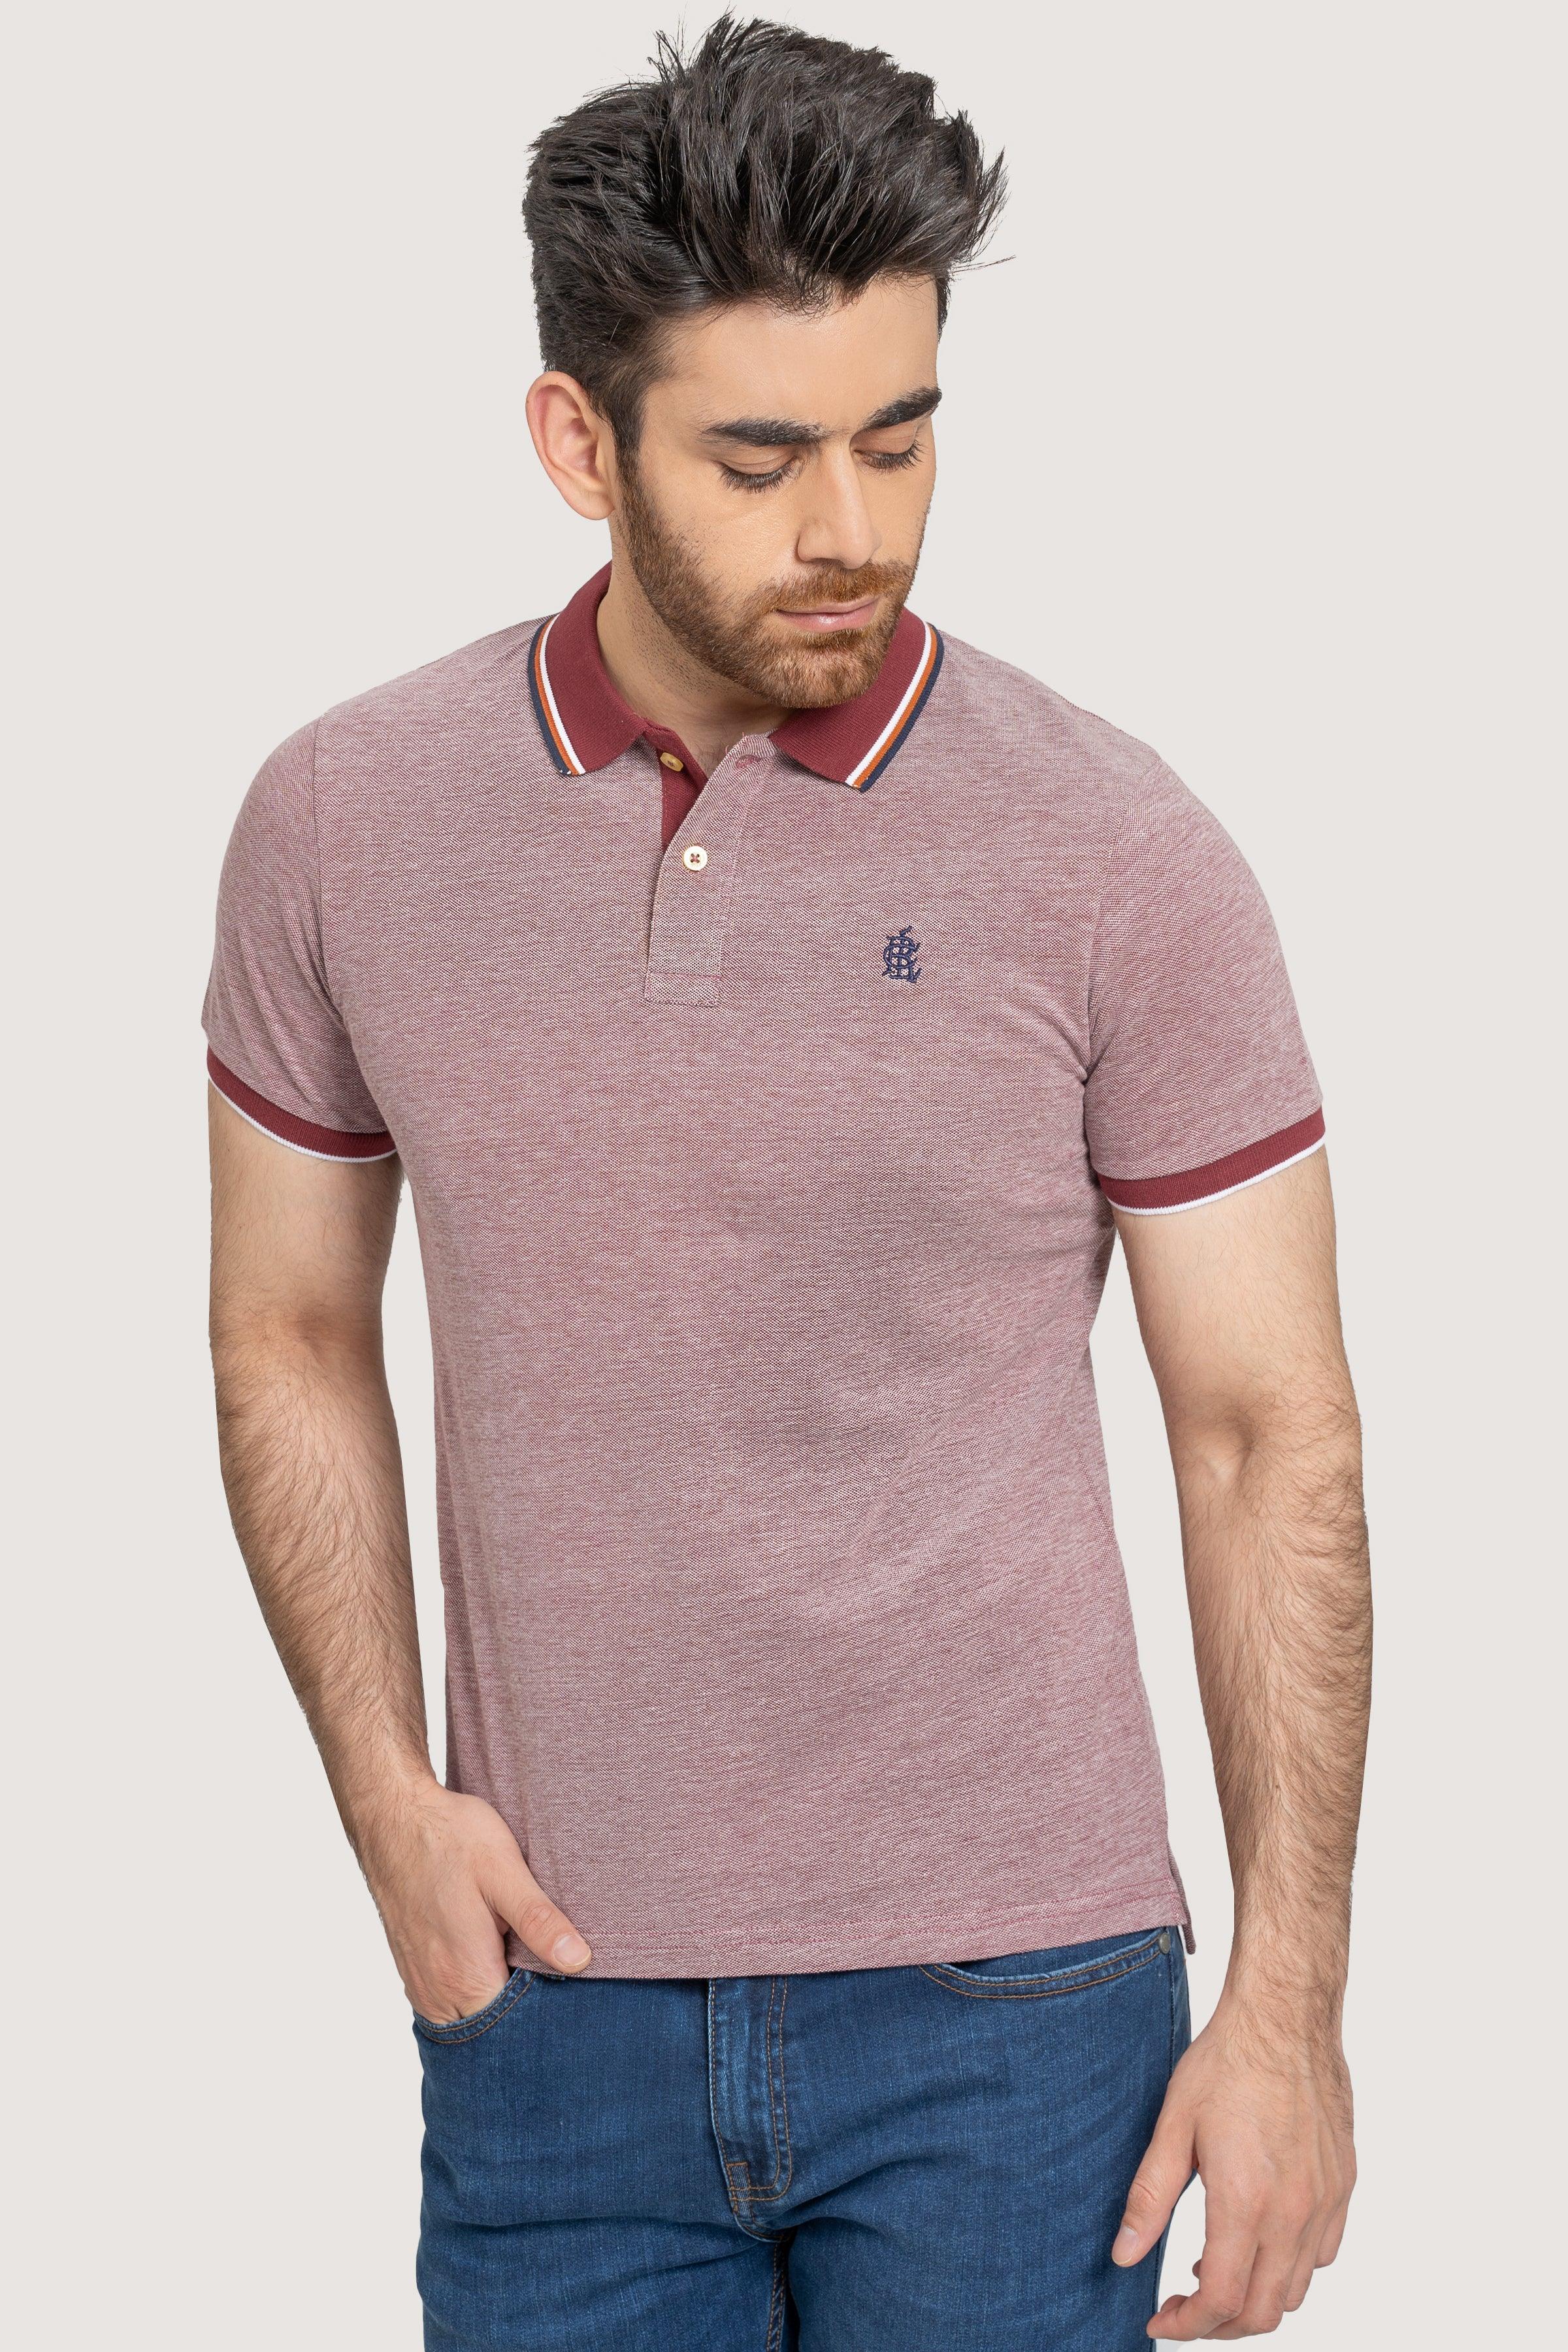 CLASSIC MAROON POLO at Charcoal Clothing